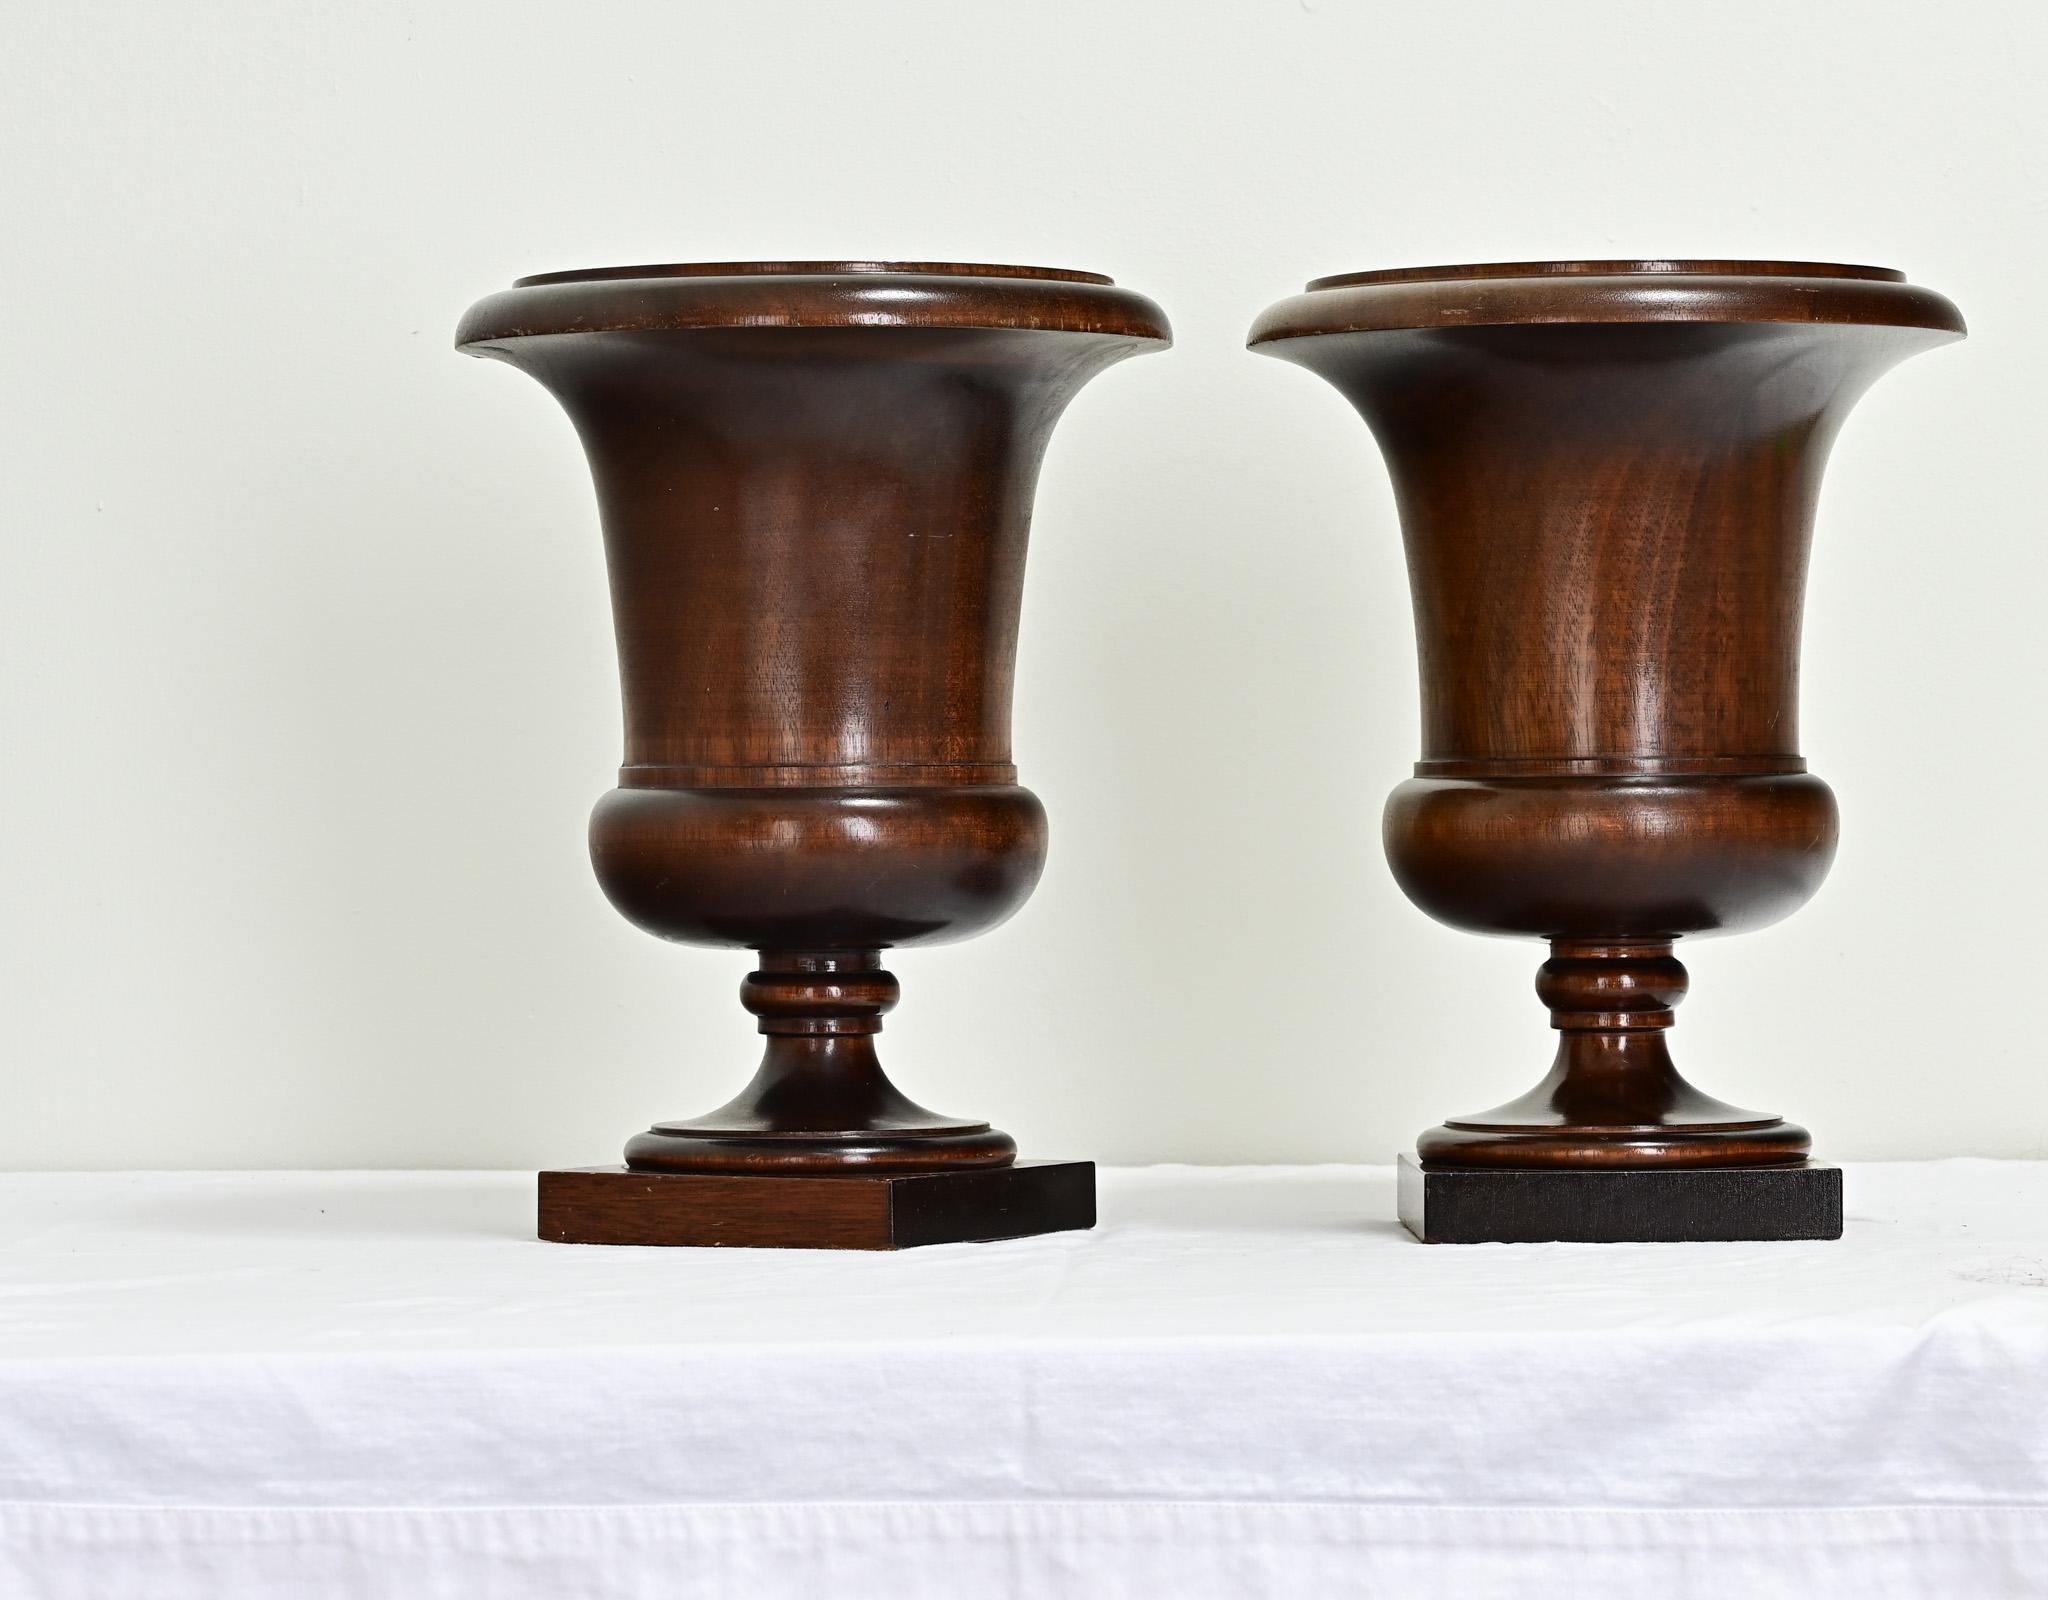 An impressive pair of walnut urns made in 19th century England. These urns have been expertly turned on a lathe to create the basin and pedestal, ending on mahogany square bases. Cleaned and polished with a paste wax, this pair is ready for your